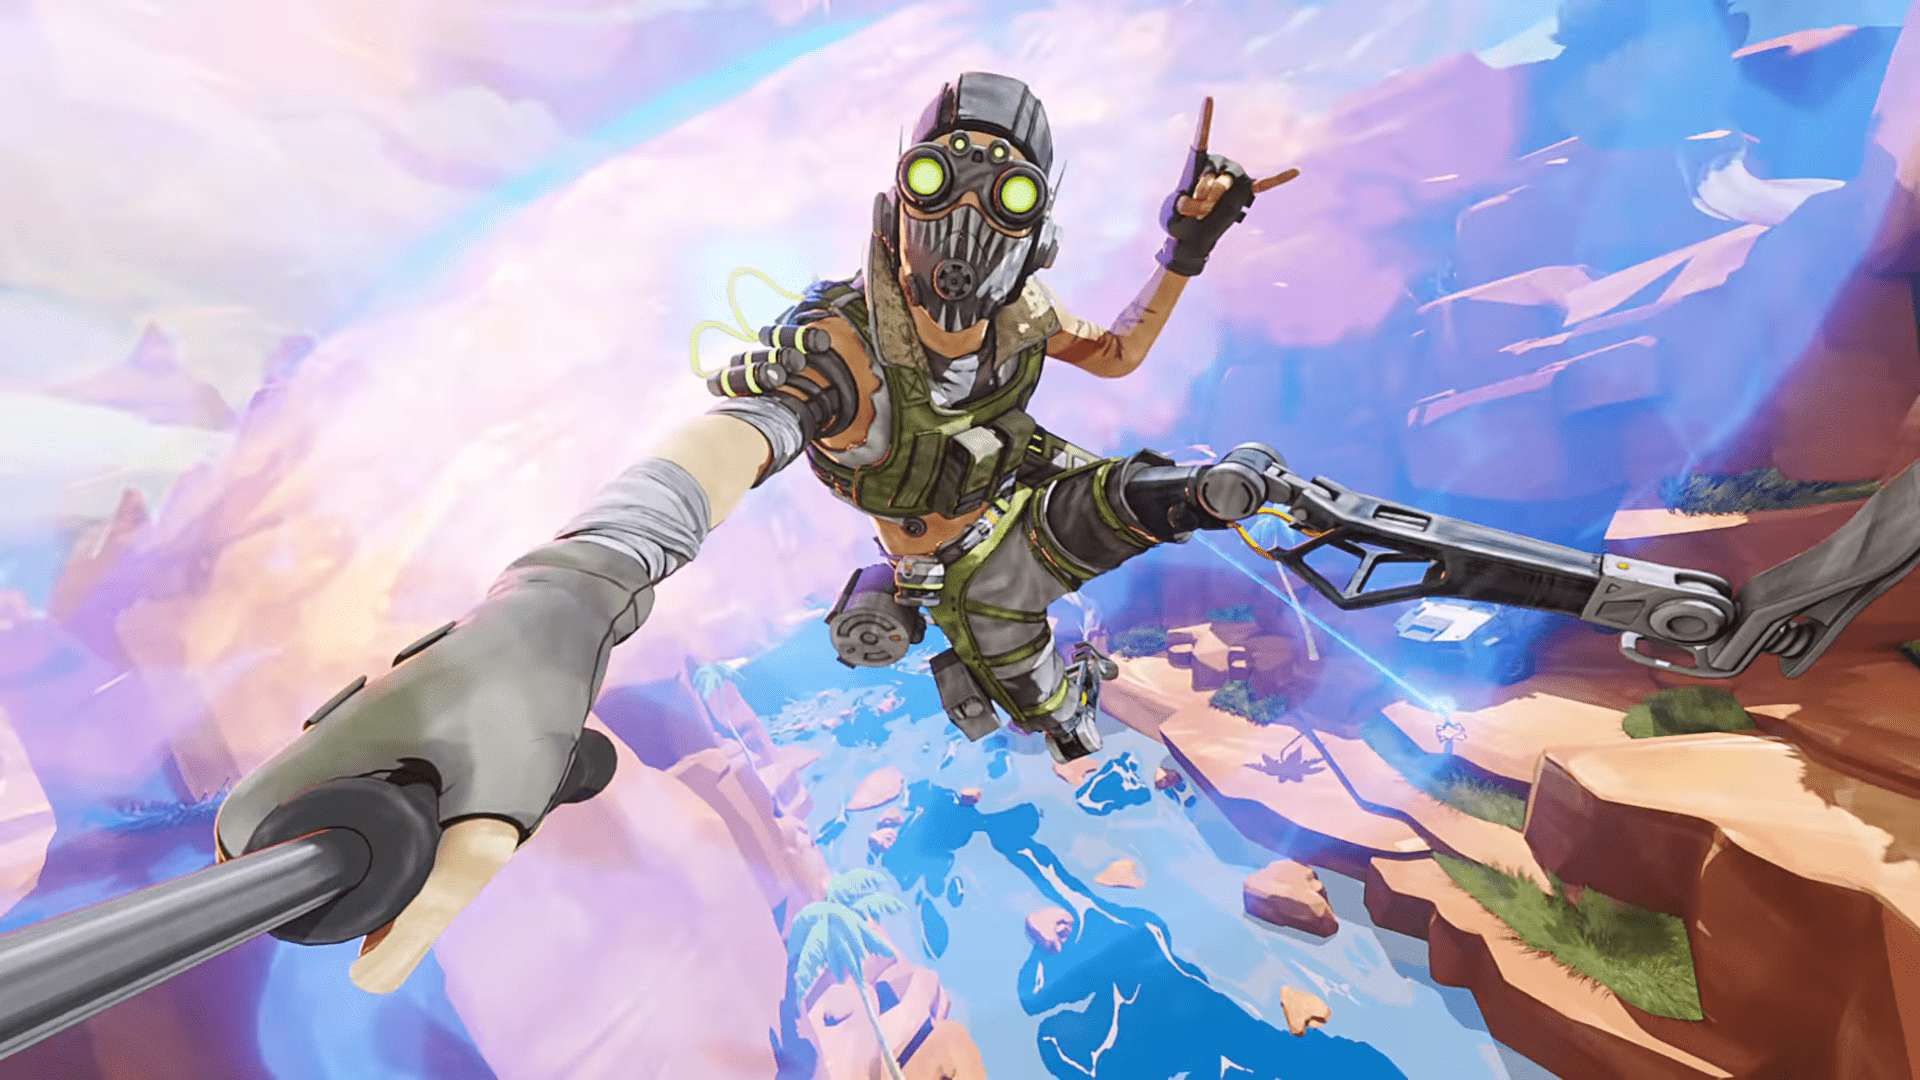 Upcoming Apex Legends Update Will Raise The Level Cap And Add Even More Rewards